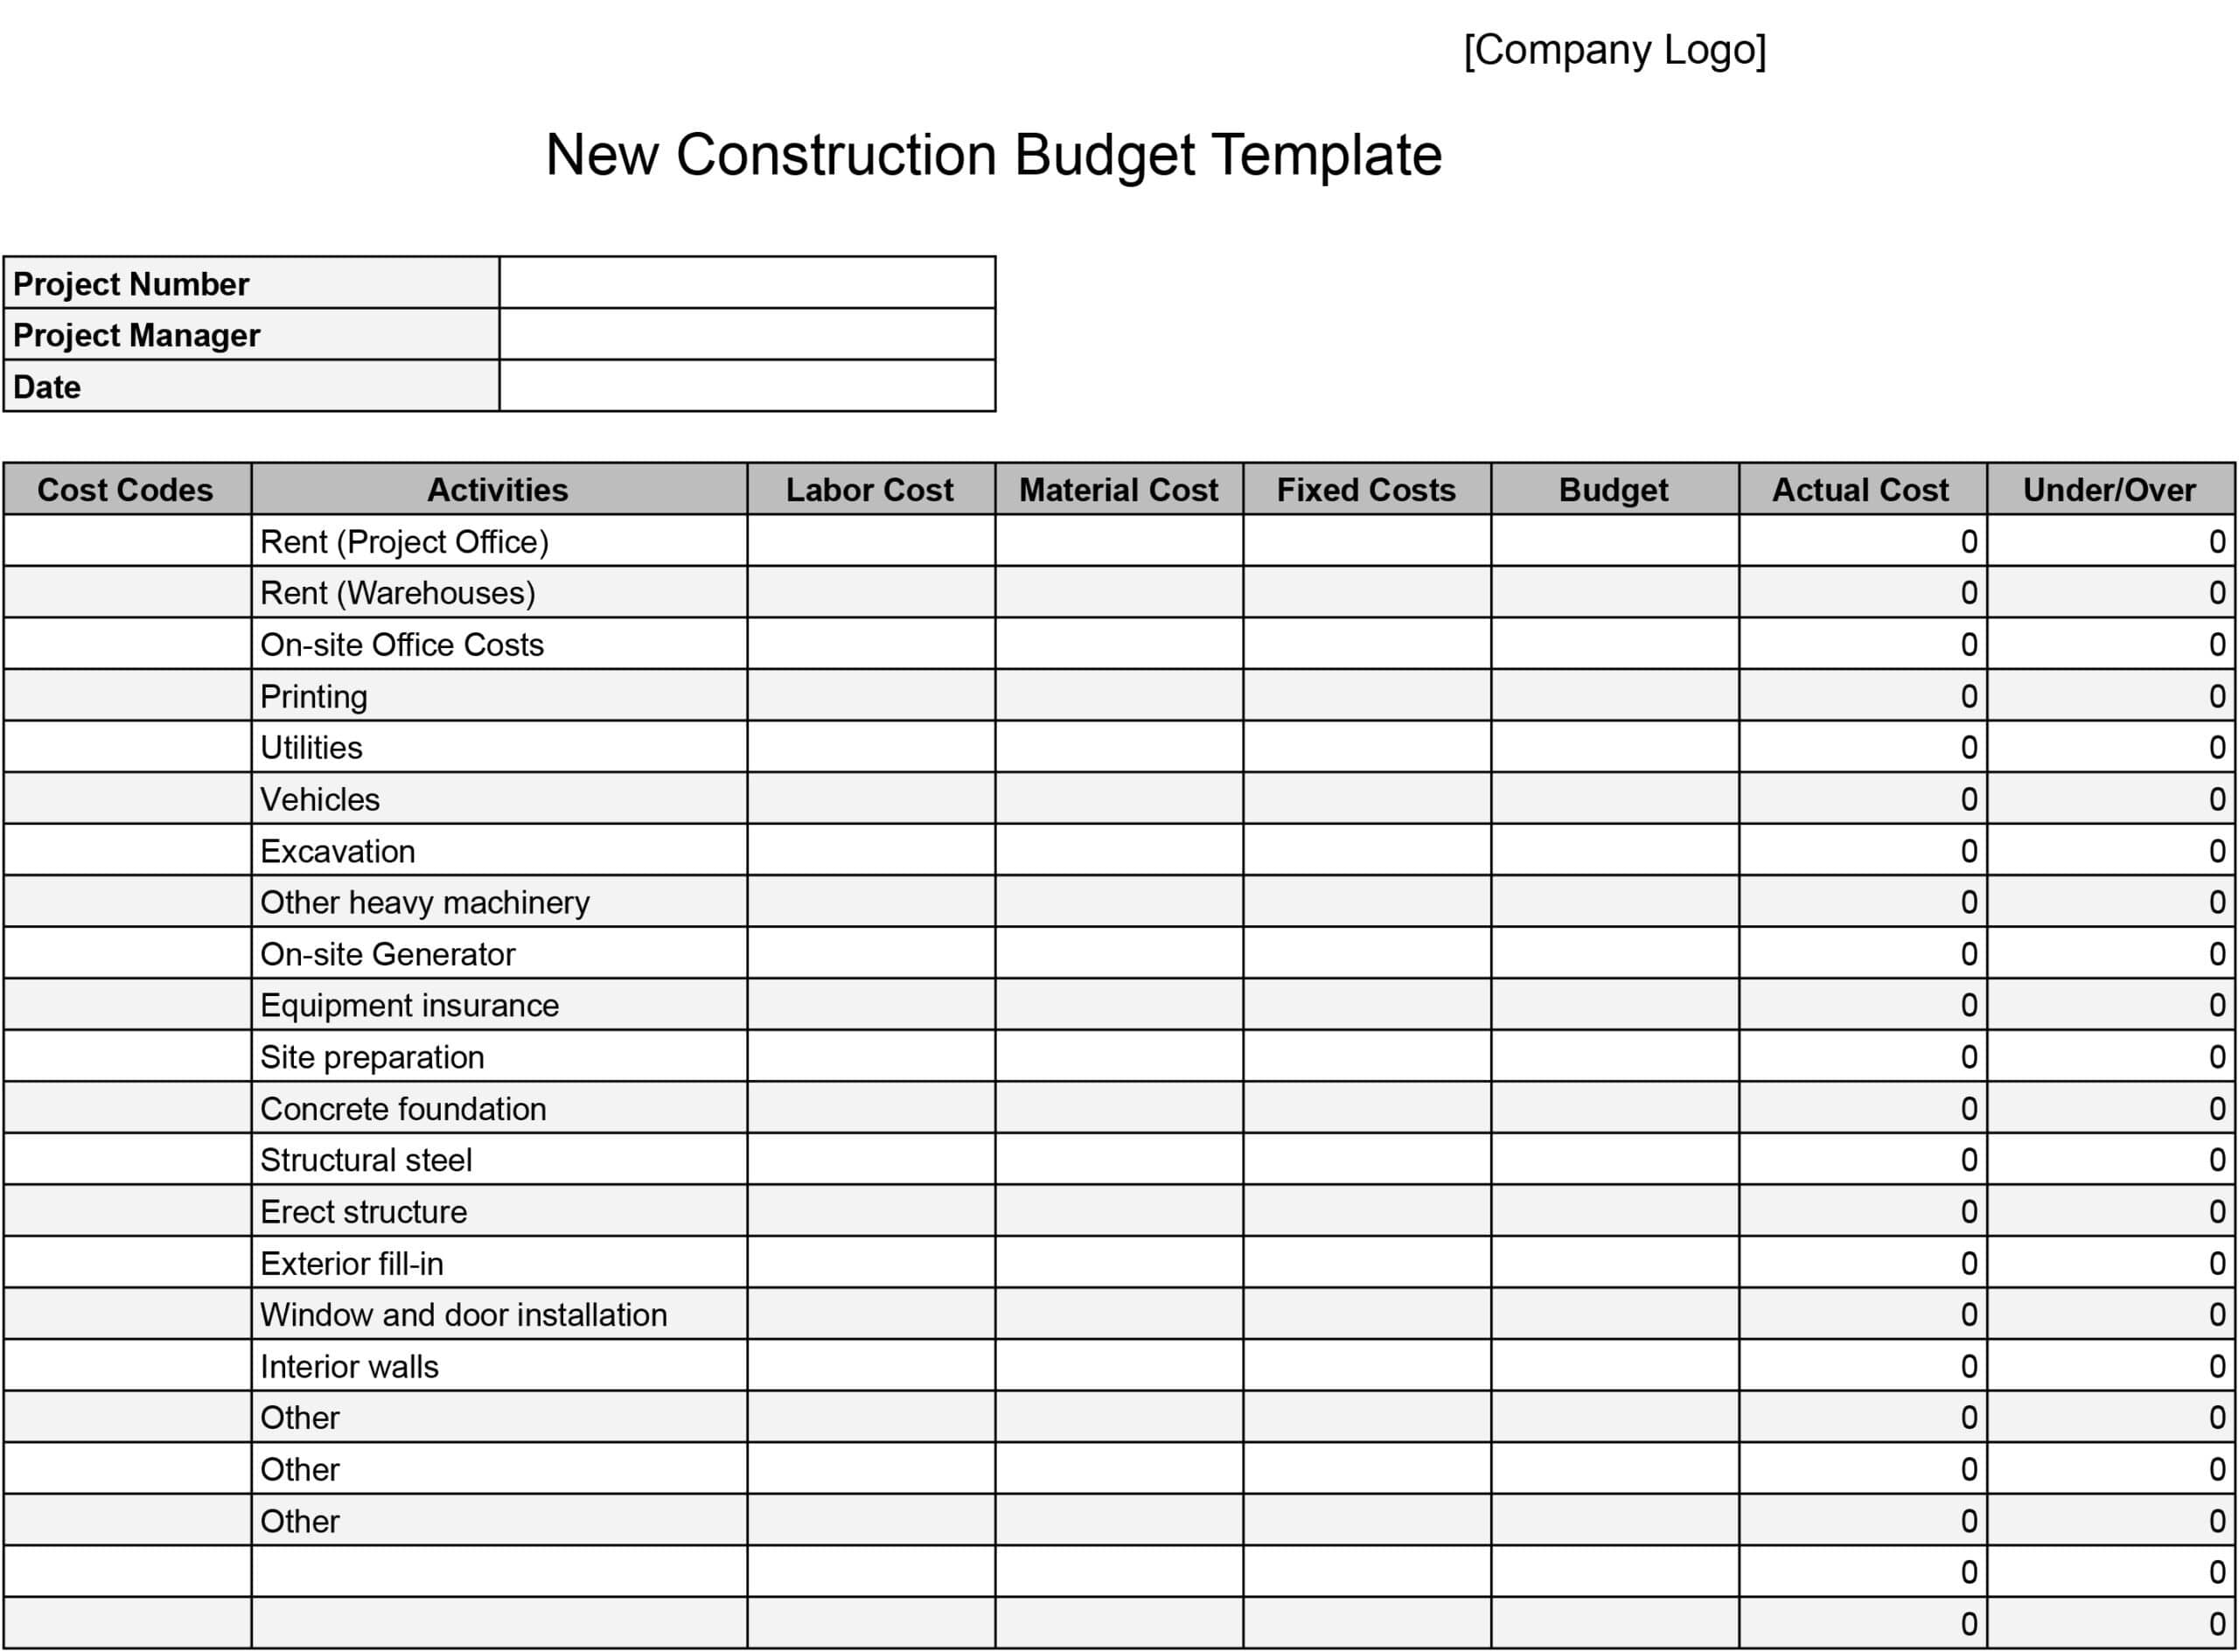 New Construction Budget Template